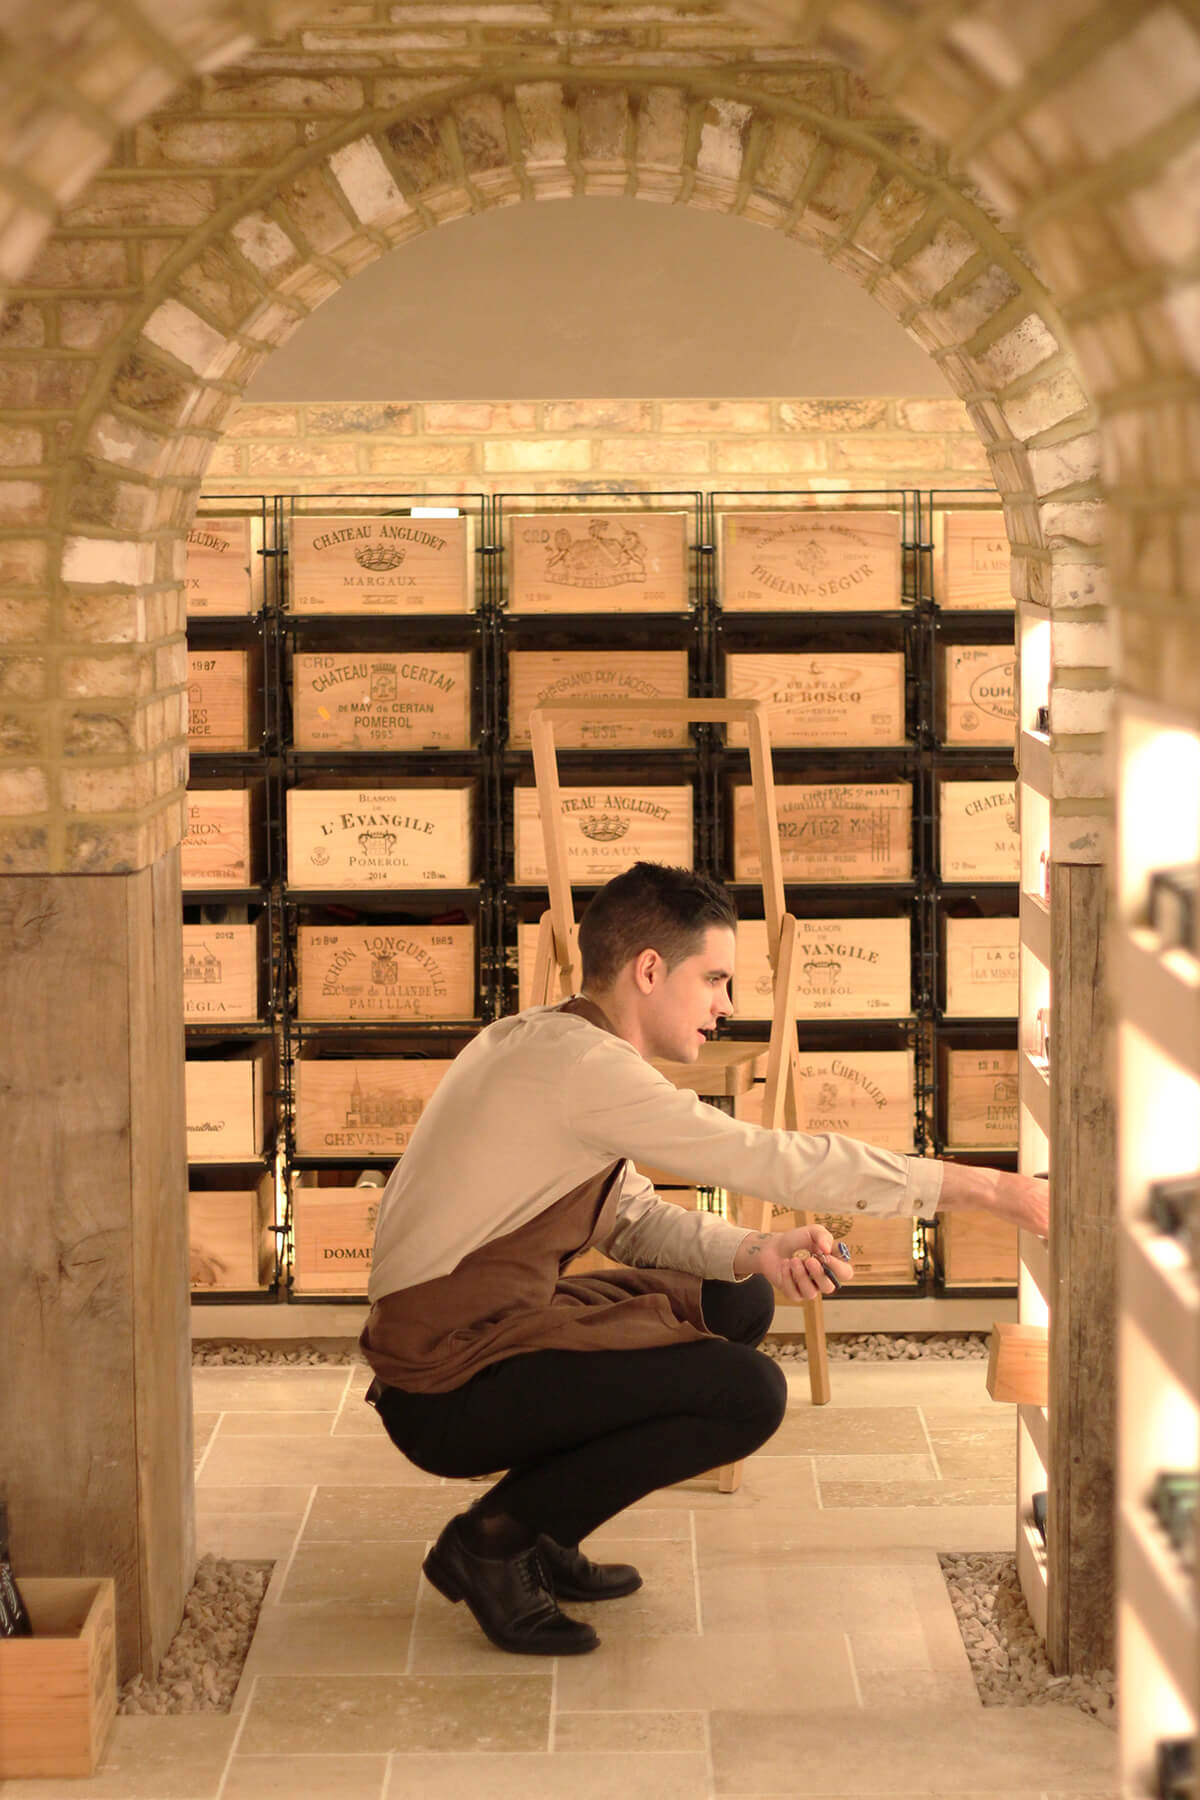 Waiter crouching to lift bottle from the wine cellar at hide restaurant